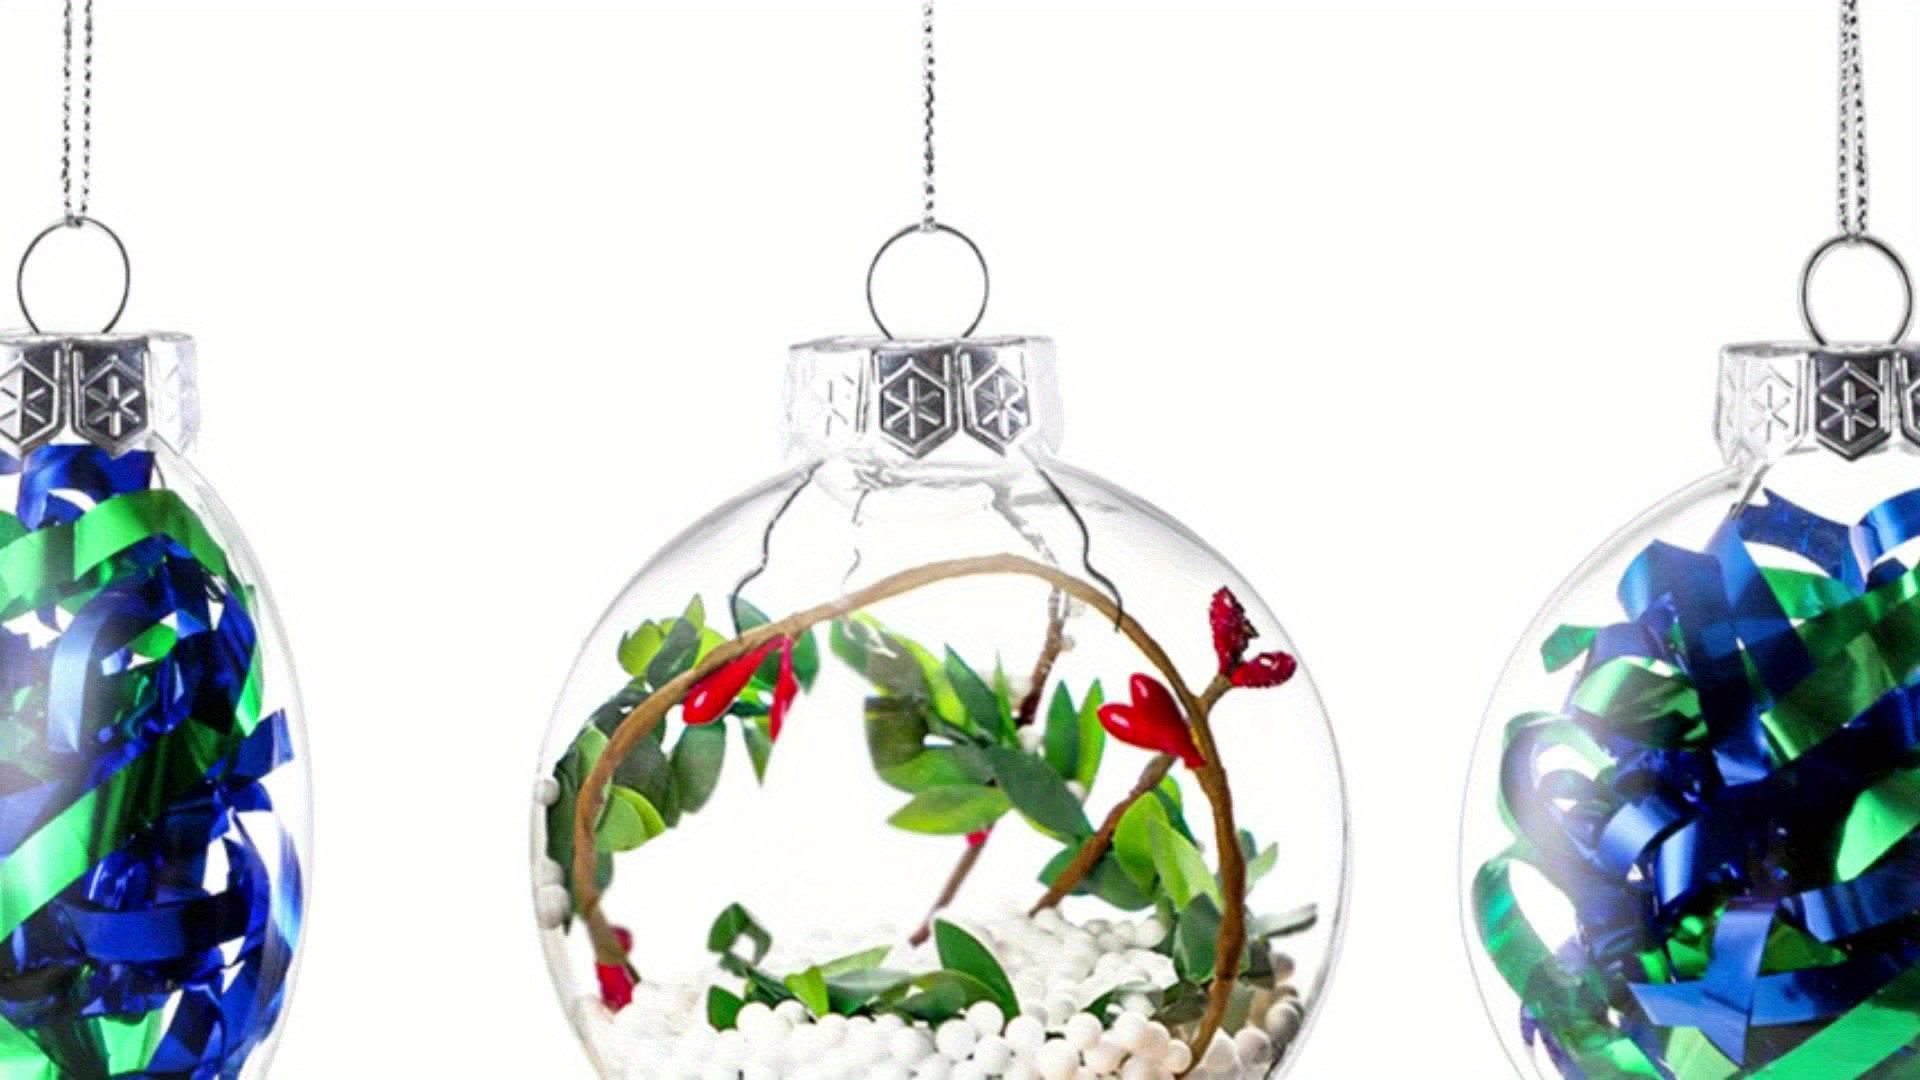 Clear Plastic Ornaments, Fillable for DIY Arts and Crafts (6.3 Inch, 6 Pack)